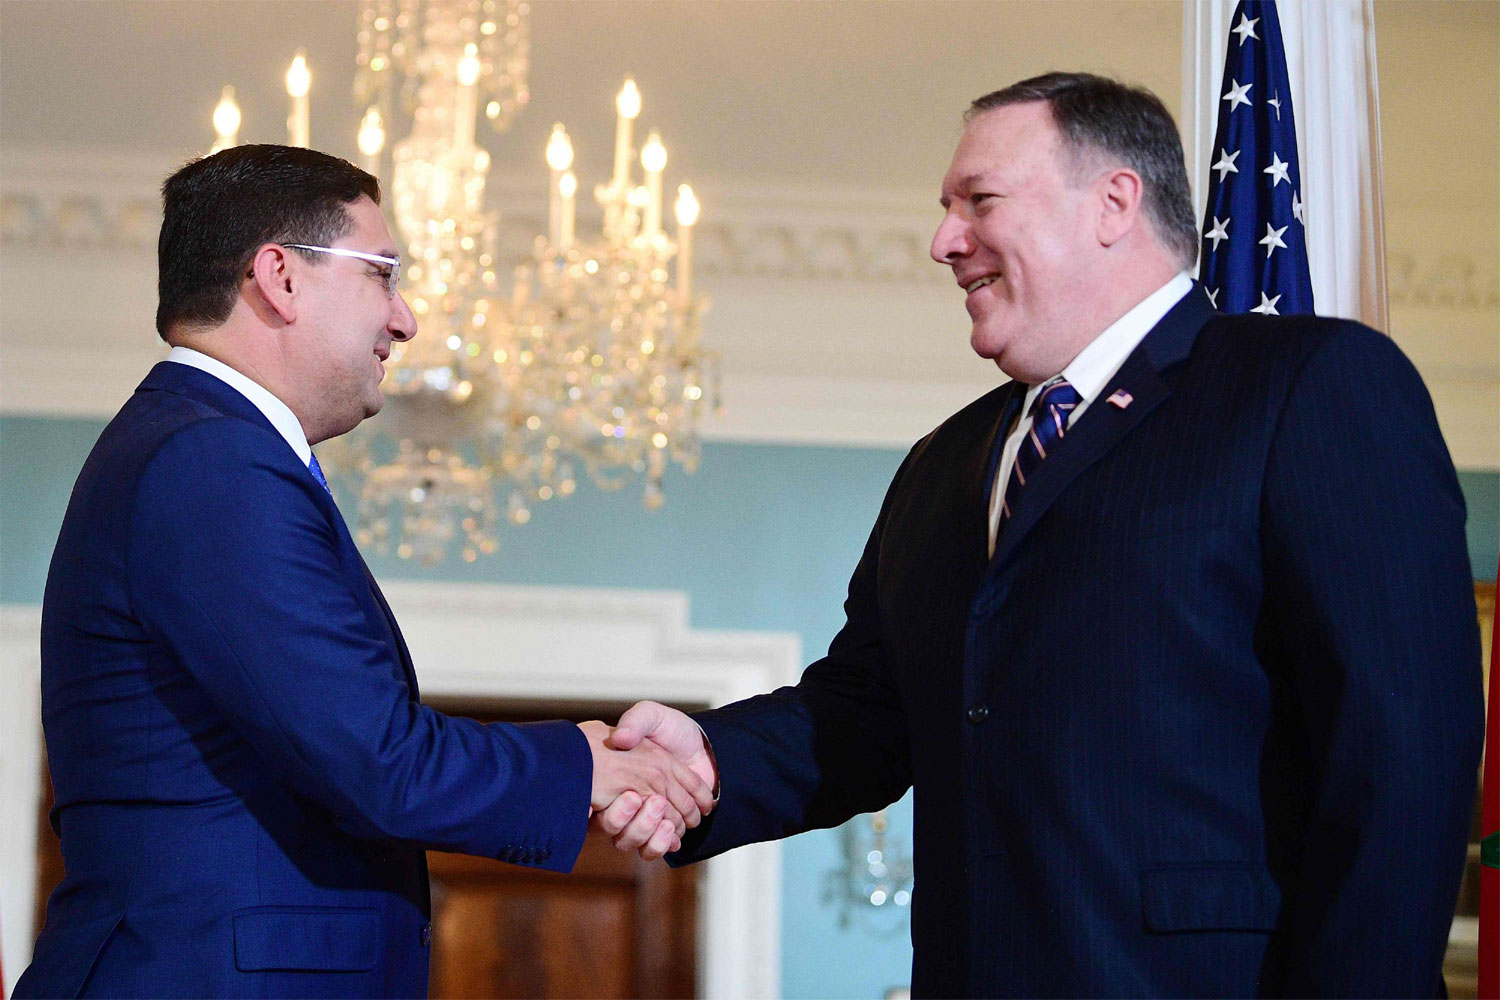 Moroccan Foreign Minister Nasser Bourita (L) shakes hands with US Secretary of State Mike Pompeo at the US State Department in Washington